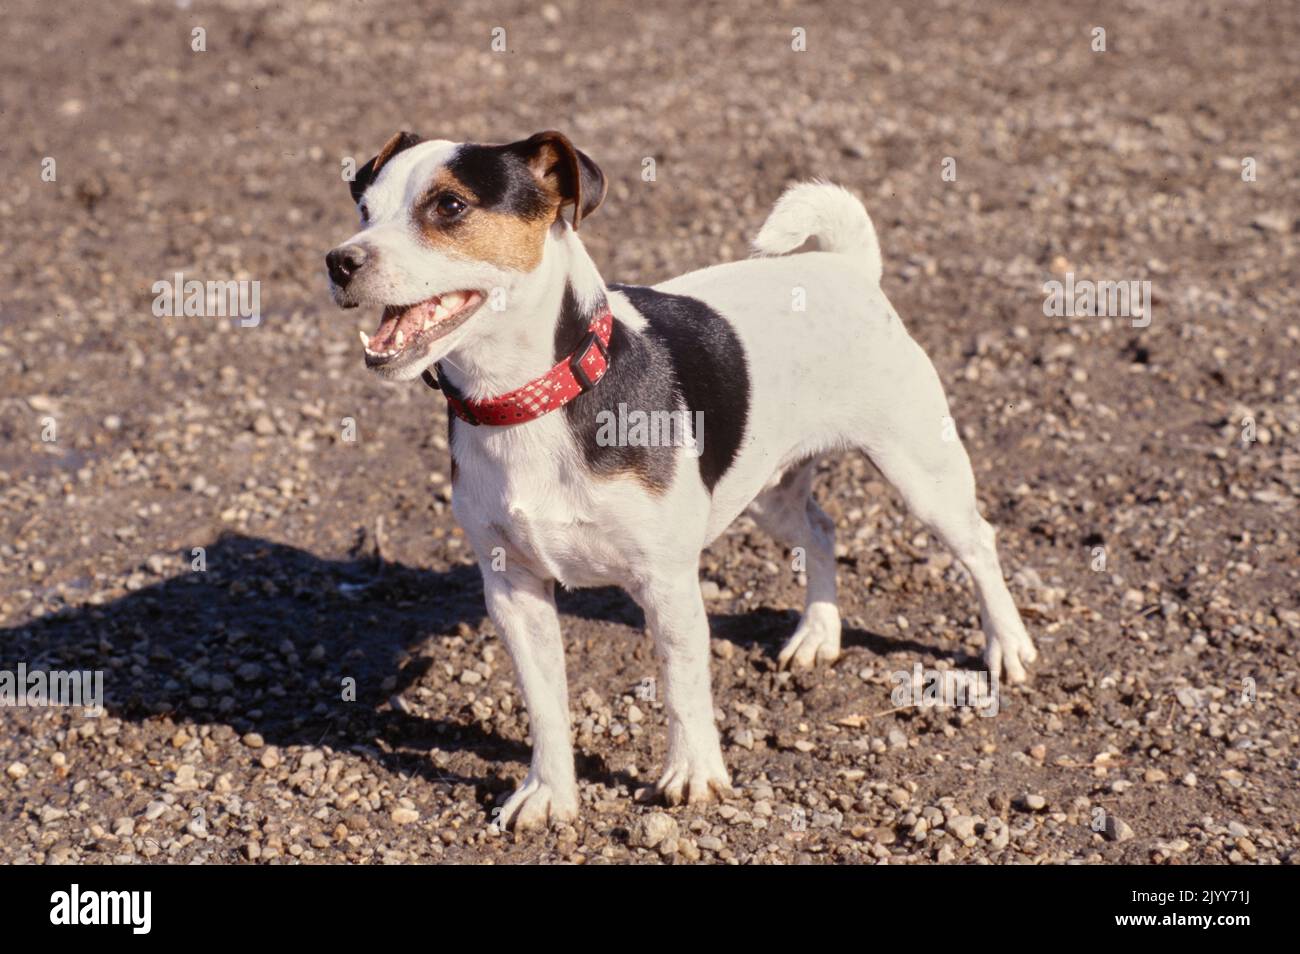 Jack Russell Terrier standing in gravel and dirt Stock Photo